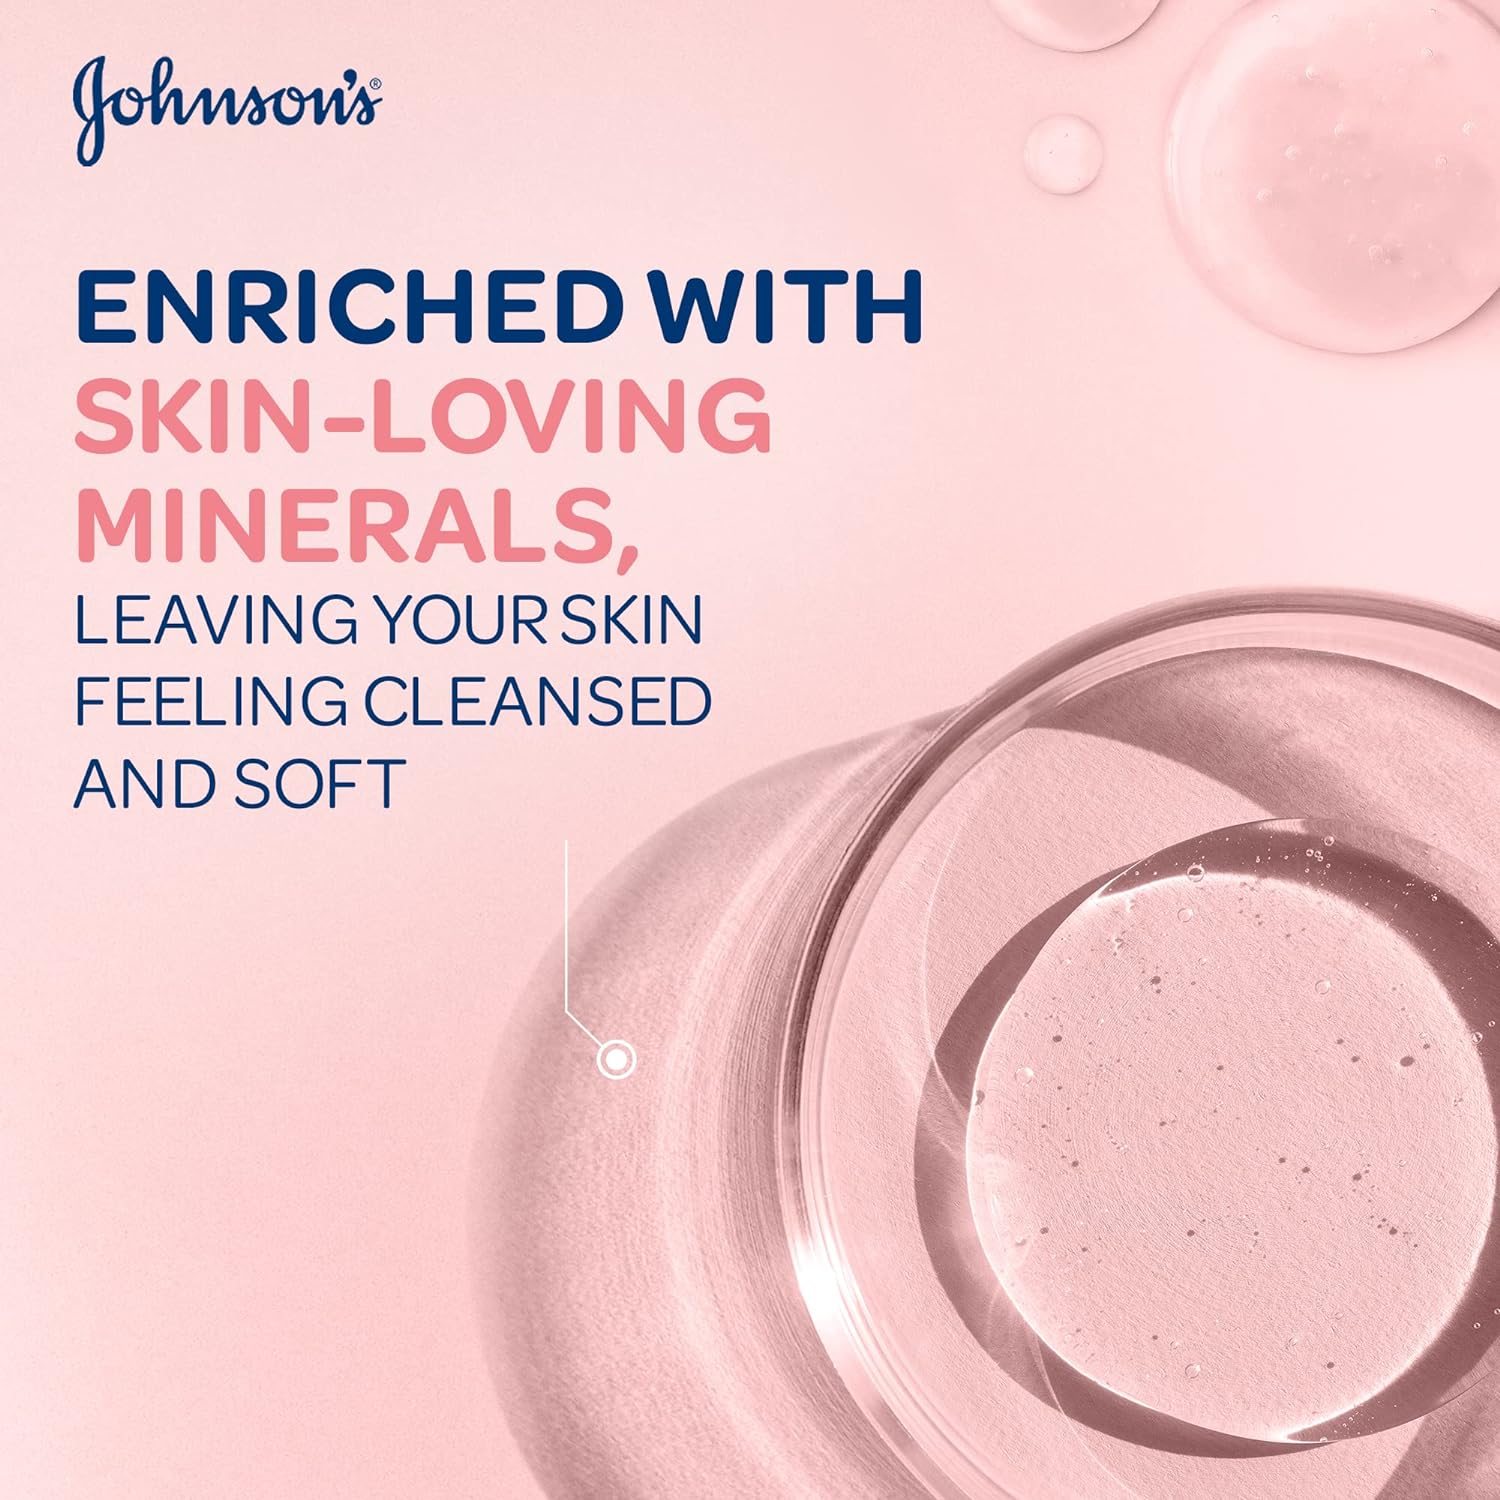 Johnson's Cleansing Facial Micellar Wipes, Refreshing, Normal Skin, Pack Of 25 Wipes